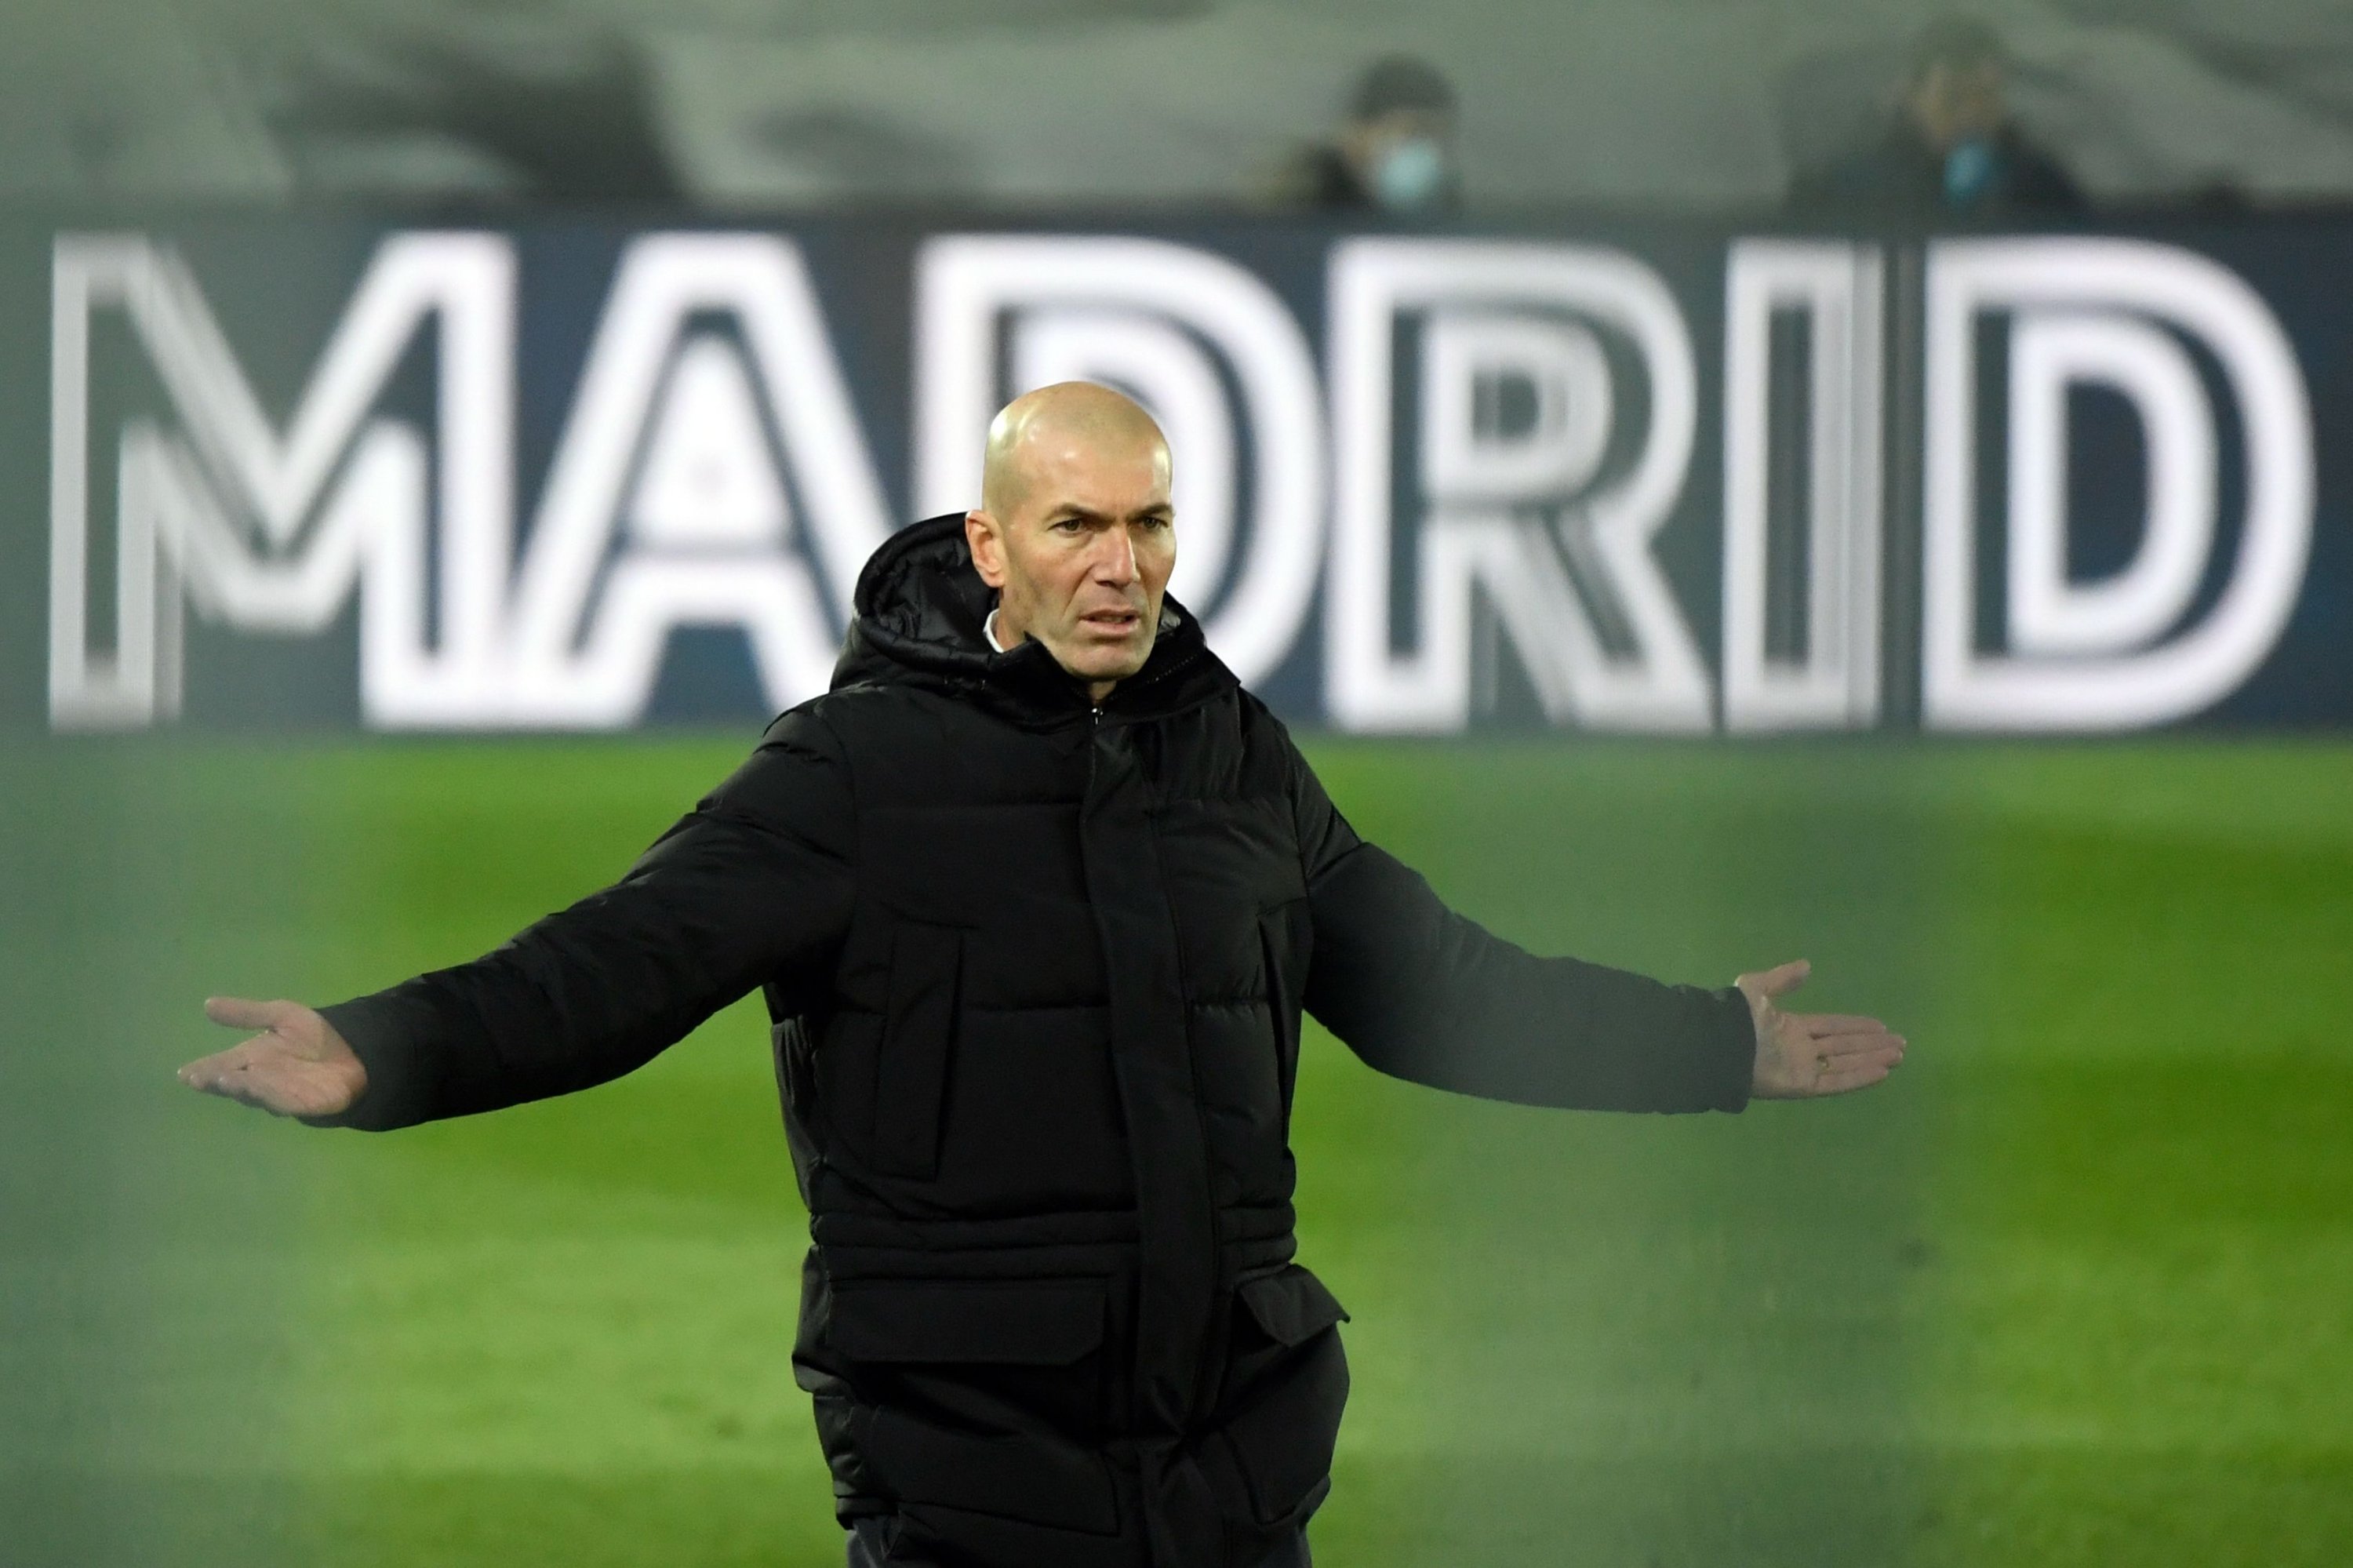 Real Madrid coach Zinedine Zidane gestures on the sideline during a match against Atletico Madrid at Alfredo di Stefano Stadium, Madrid, Dec. 12, 2020. (AFP Photo)